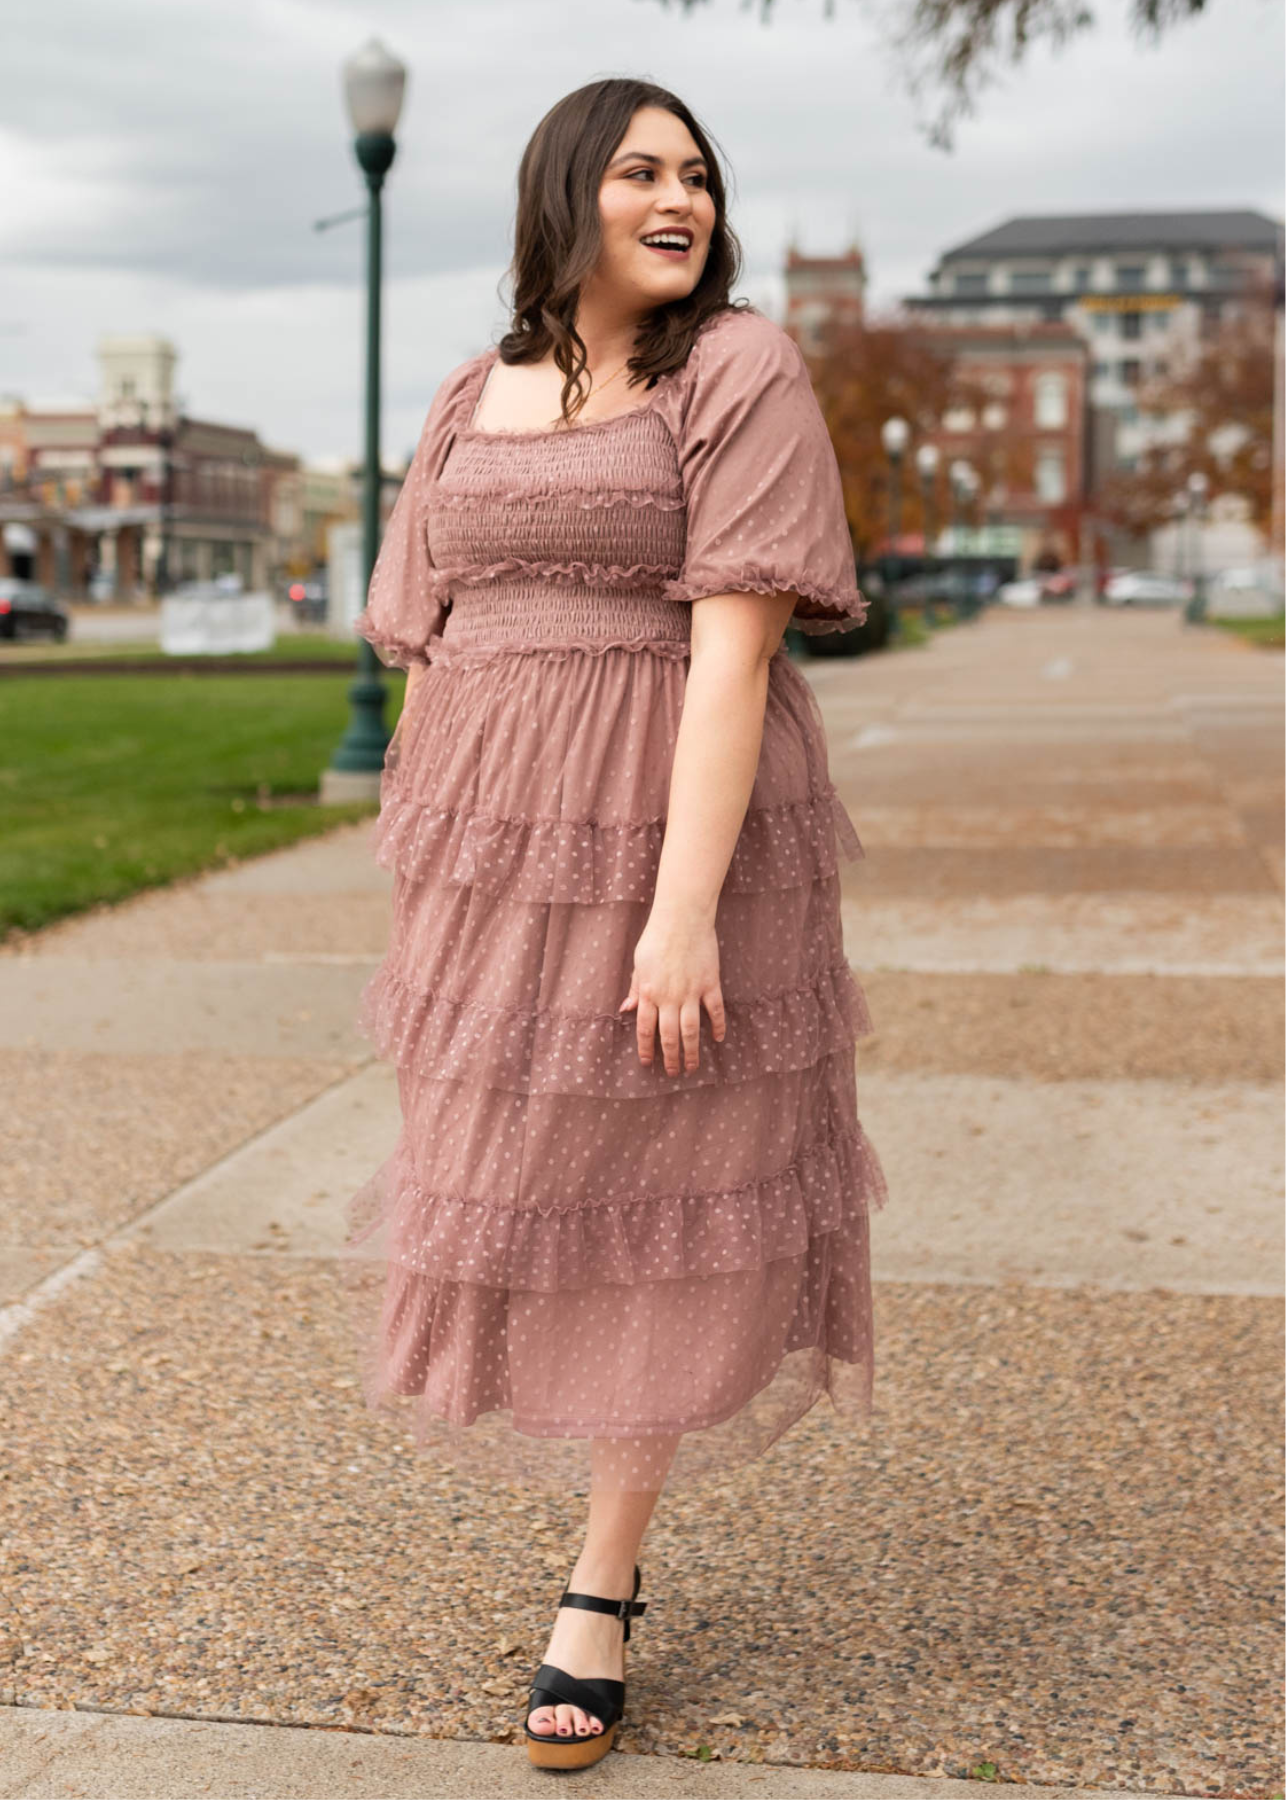 Short sleeve dusty rose dress with tulle ruffles on the skirt